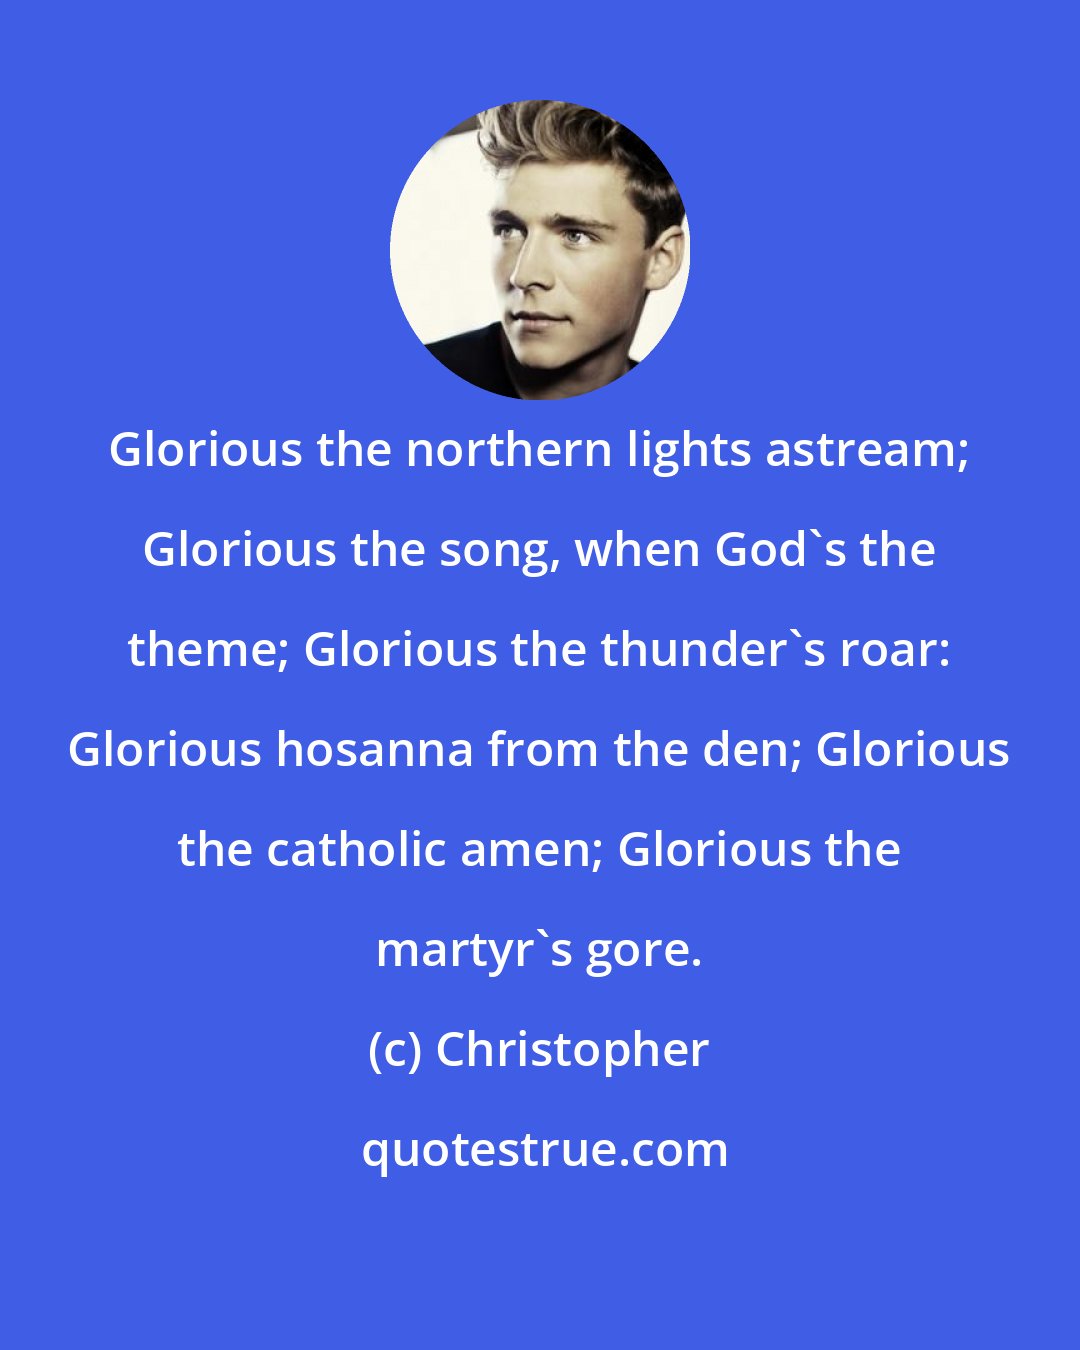 Christopher: Glorious the northern lights astream; Glorious the song, when God's the theme; Glorious the thunder's roar: Glorious hosanna from the den; Glorious the catholic amen; Glorious the martyr's gore.